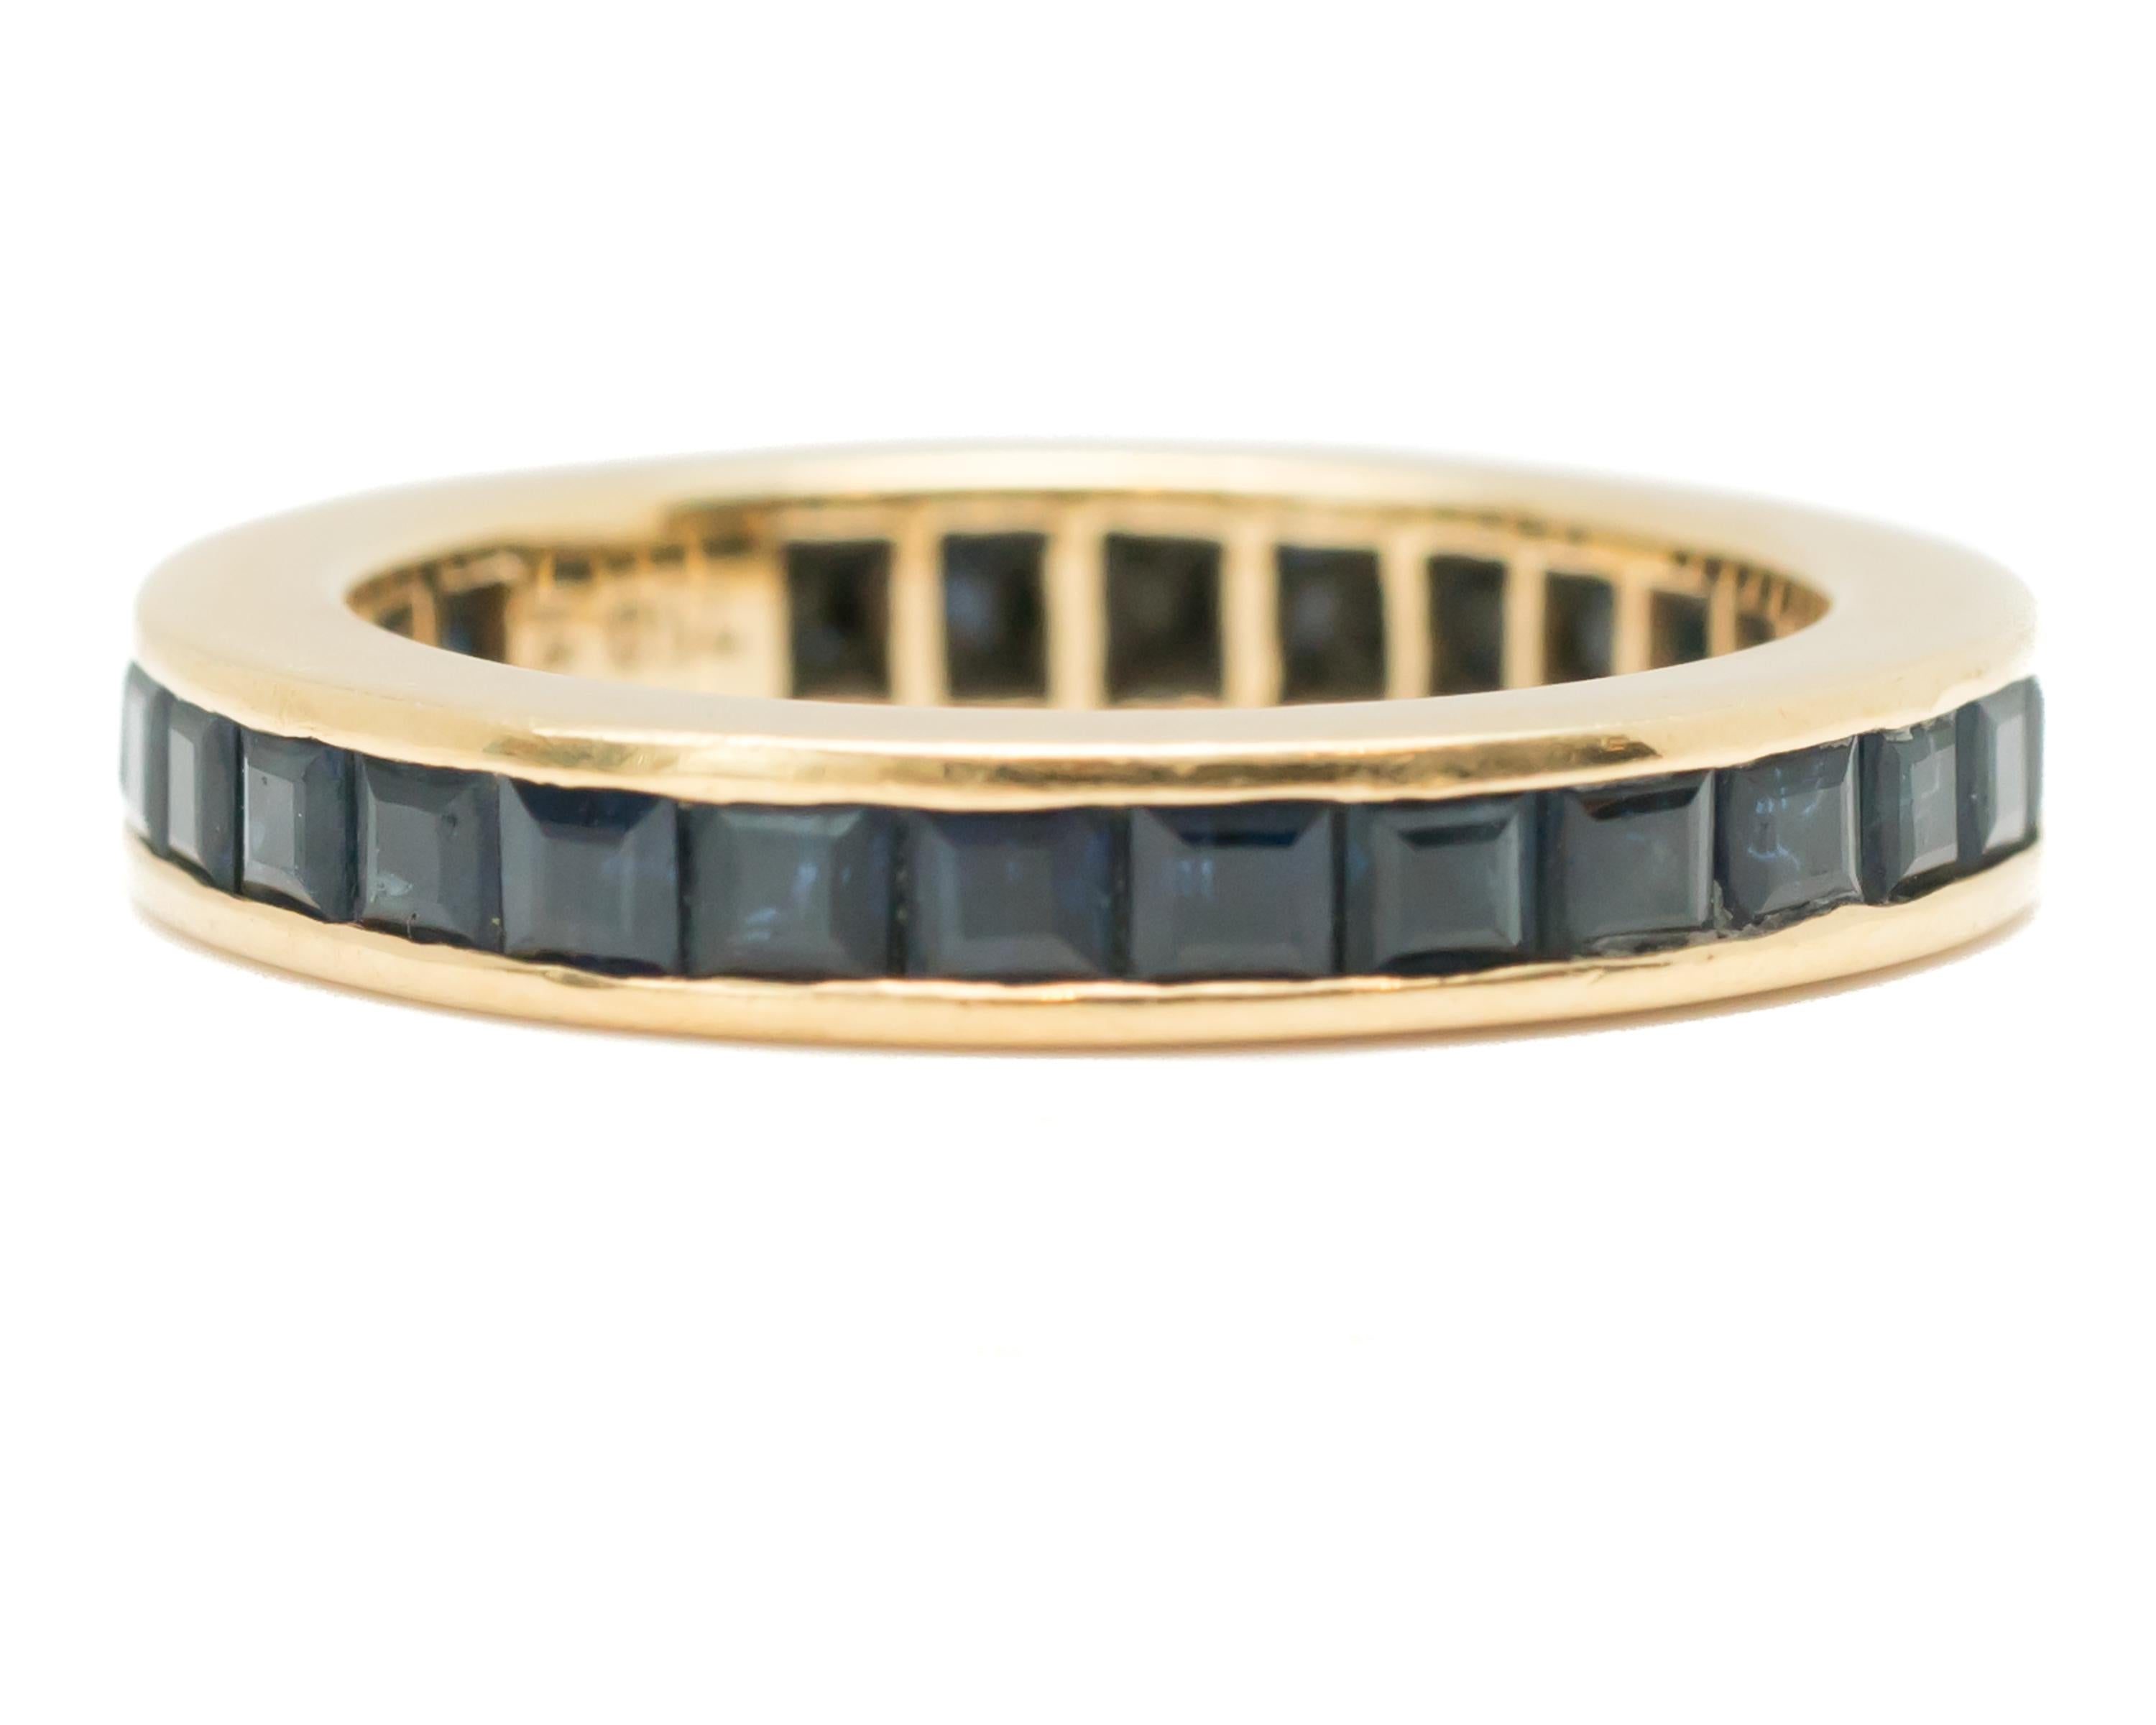 1950s Retro Sapphire Eternity Band - 18 Karat Yellow Gold, Sapphires

Features:
French cut Blue Sapphires
Channel set Blue Sapphires
18 Karat Yellow Gold
Eternity Band Design
3.25 millimeters wide
2.5 millimeters from finger to top of ring
Ring fits